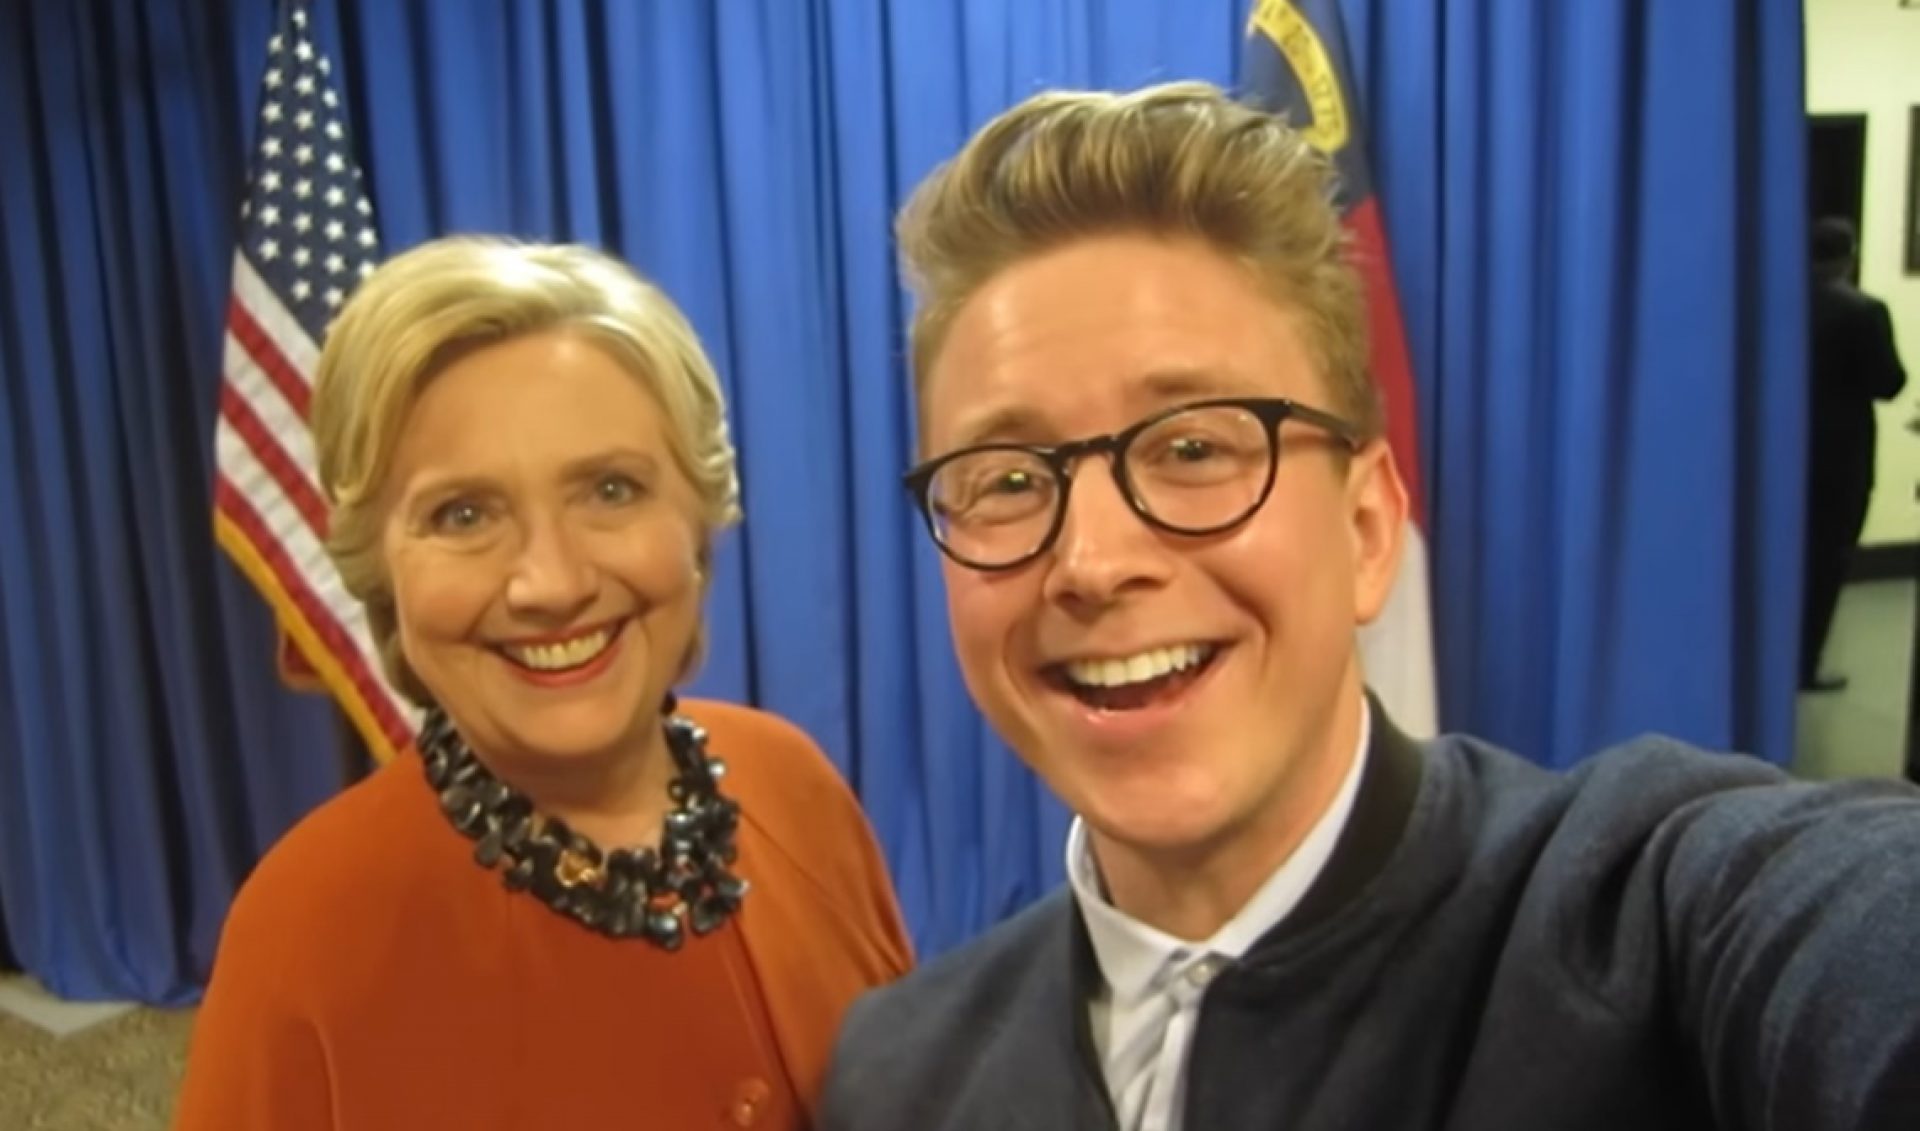 Tyler Oakley Hangs With Hillary Clinton: An Election Day YouTube Roundup